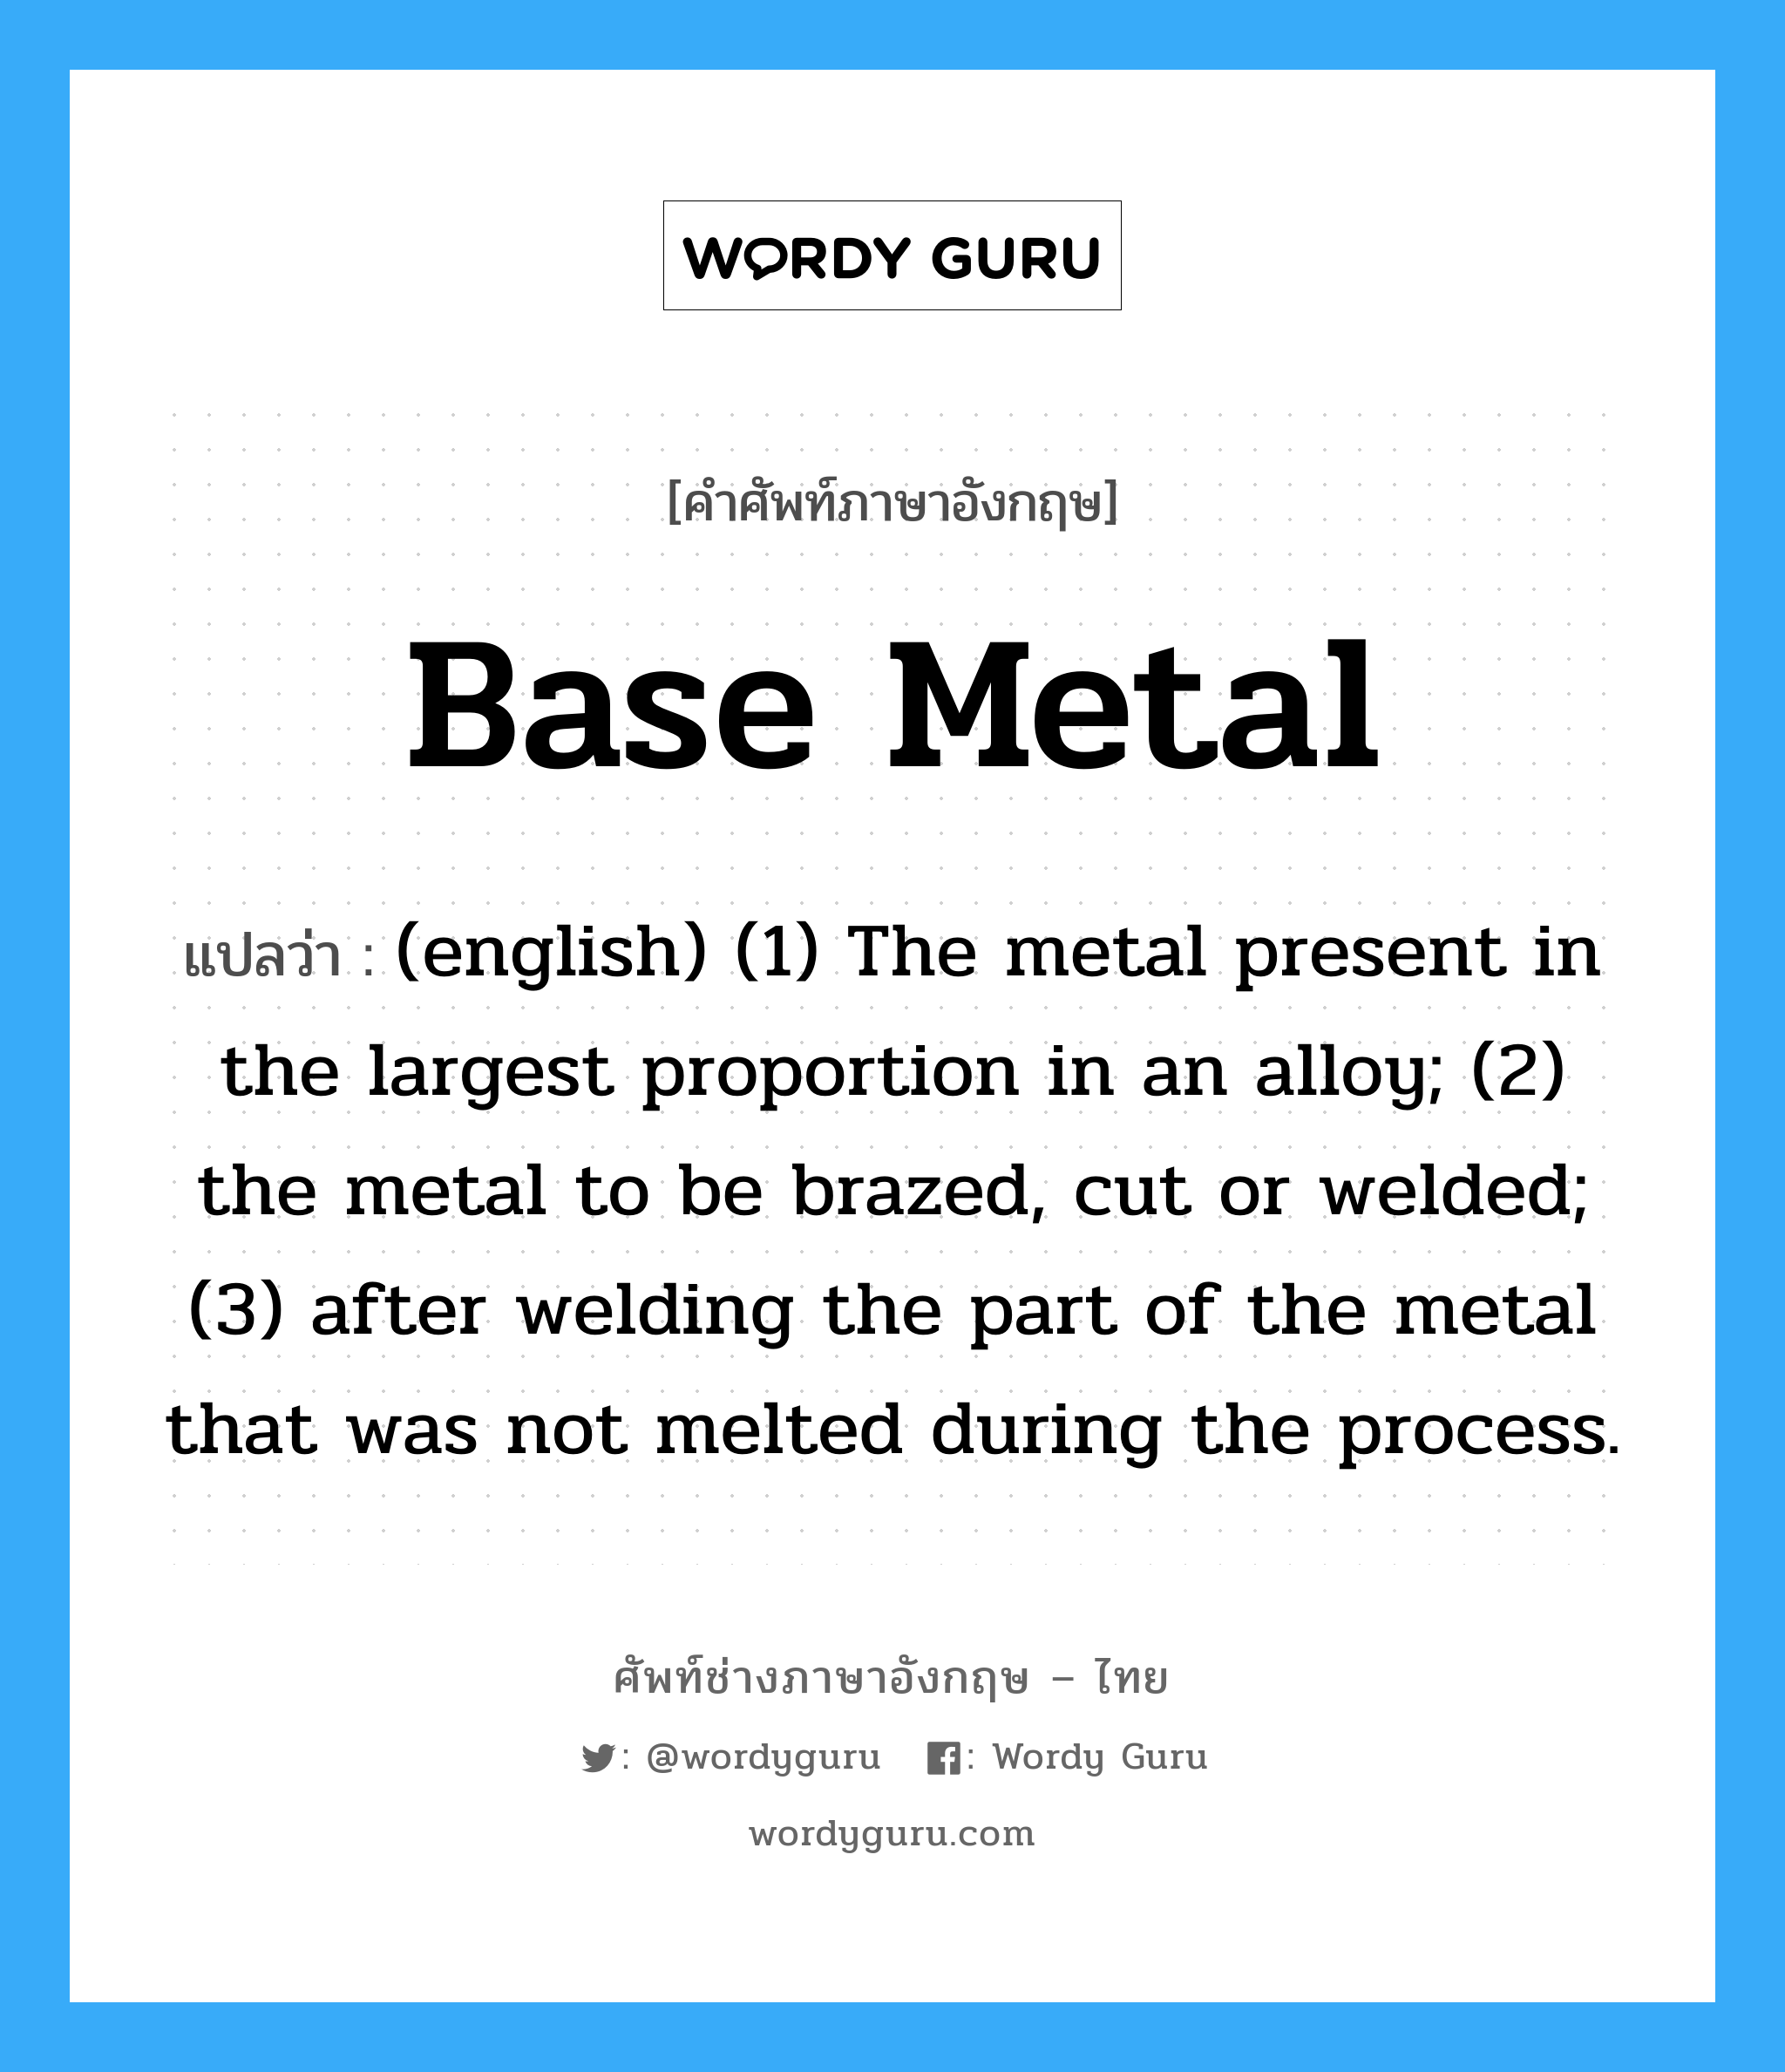 (english) (1) The metal present in the largest proportion in an alloy; (2) the metal to be brazed, cut or welded; (3) after welding the part of the metal that was not melted during the process. ภาษาอังกฤษ?, คำศัพท์ช่างภาษาอังกฤษ - ไทย (english) (1) The metal present in the largest proportion in an alloy; (2) the metal to be brazed, cut or welded; (3) after welding the part of the metal that was not melted during the process. คำศัพท์ภาษาอังกฤษ (english) (1) The metal present in the largest proportion in an alloy; (2) the metal to be brazed, cut or welded; (3) after welding the part of the metal that was not melted during the process. แปลว่า Base Metal